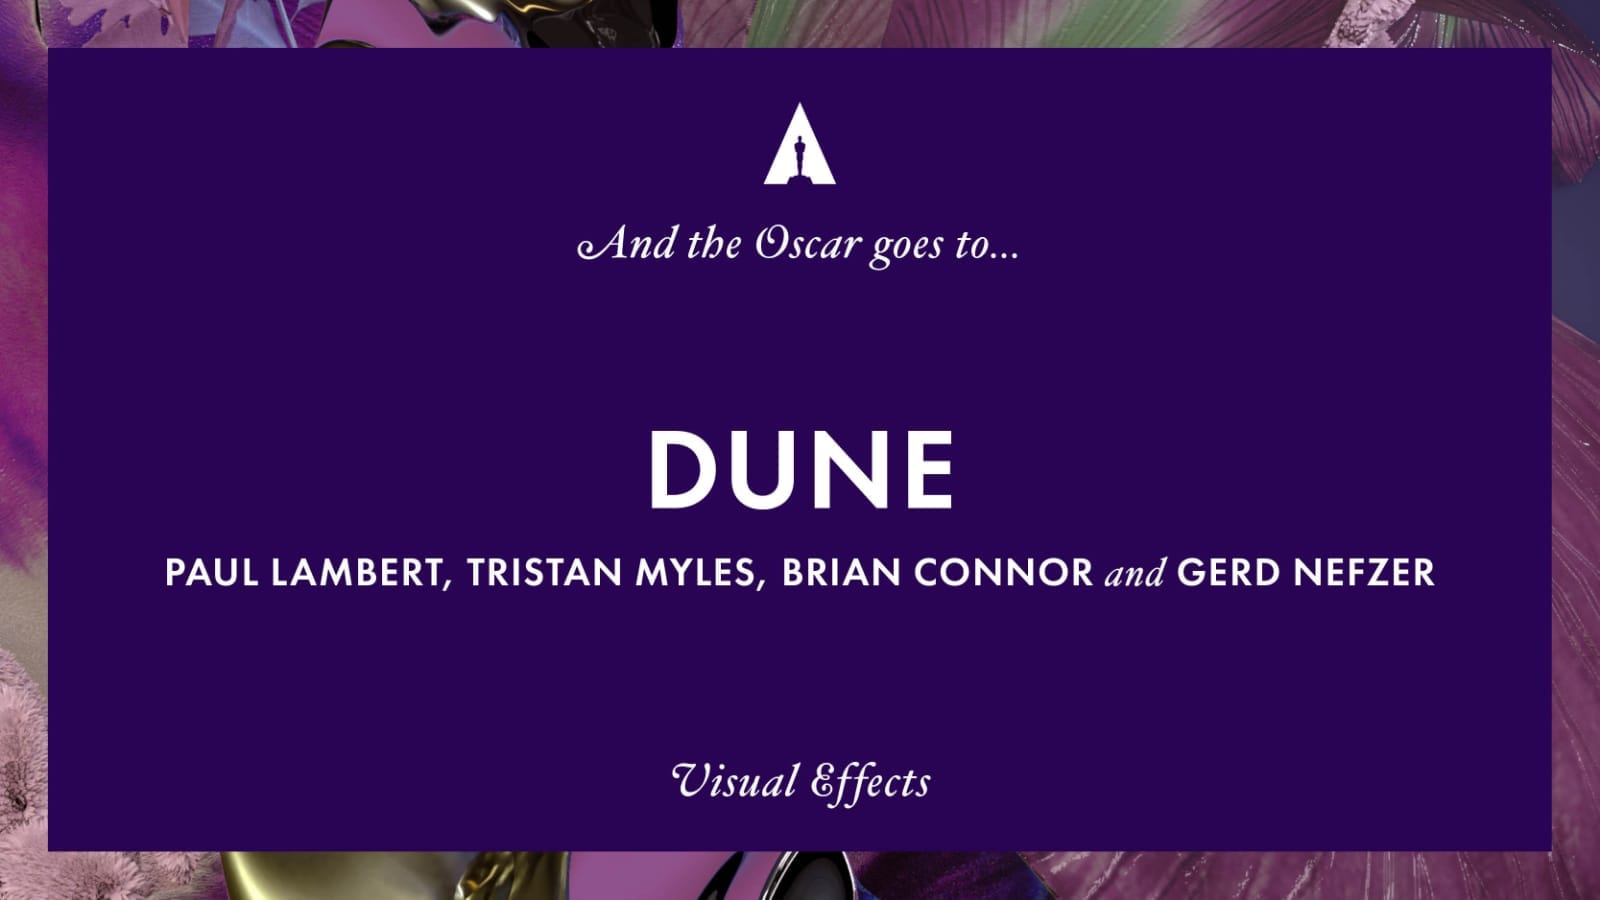 Dune wins Best Visual Effects at the 2022 Oscars